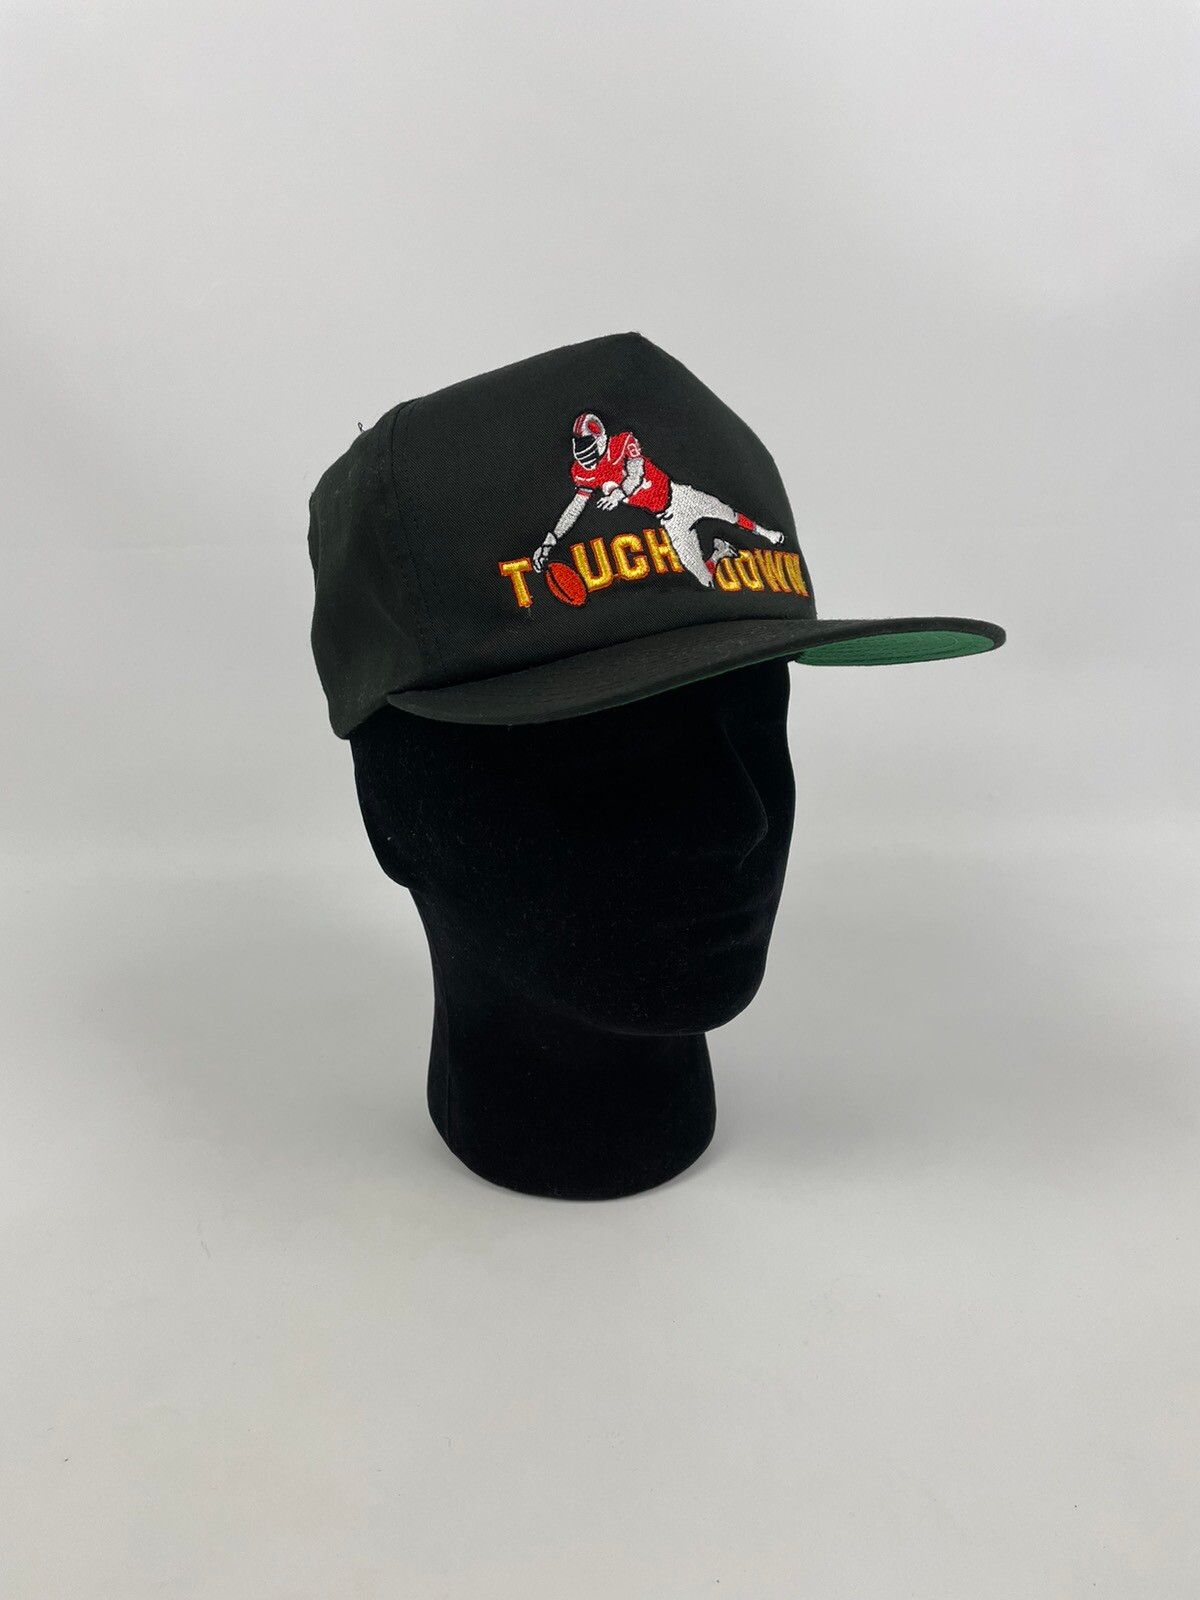 Pre-owned Vintage 1994  Touch Down American Football Hat Cap Snapback In Black